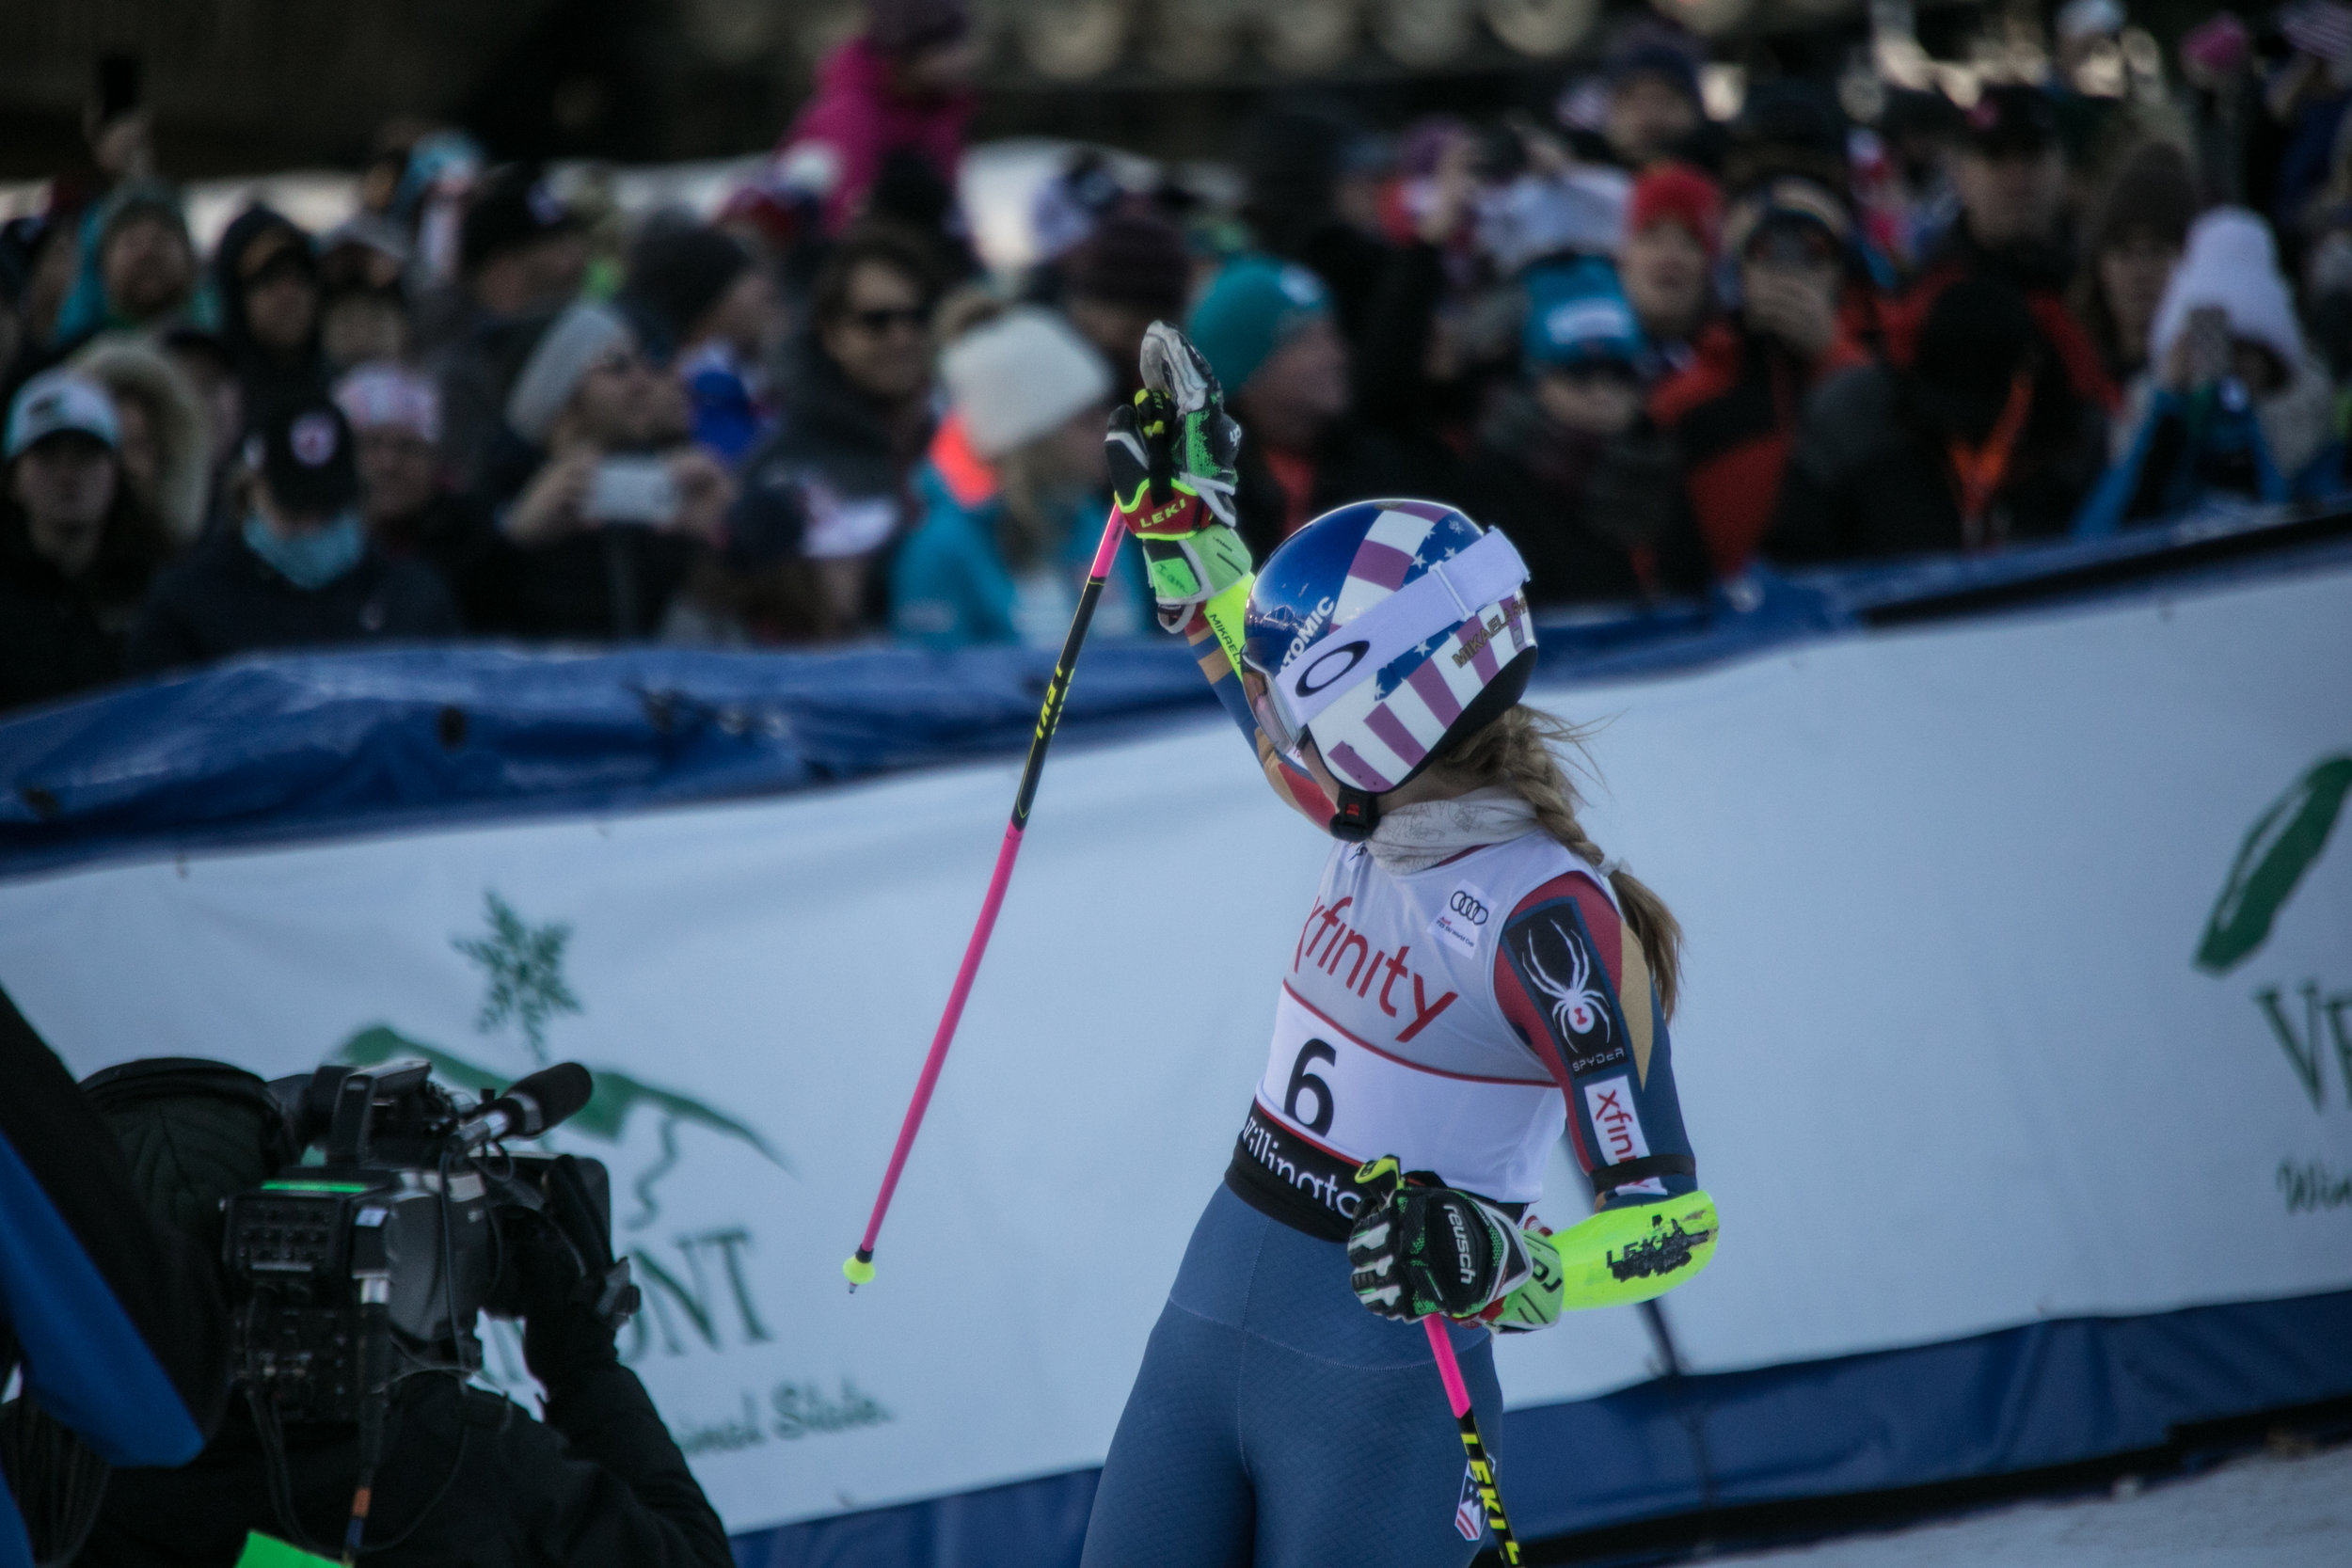 Mikaela Shiffrin waves to the crazed crowd after coming in 2nd on Saturday in the Giant Slalom.